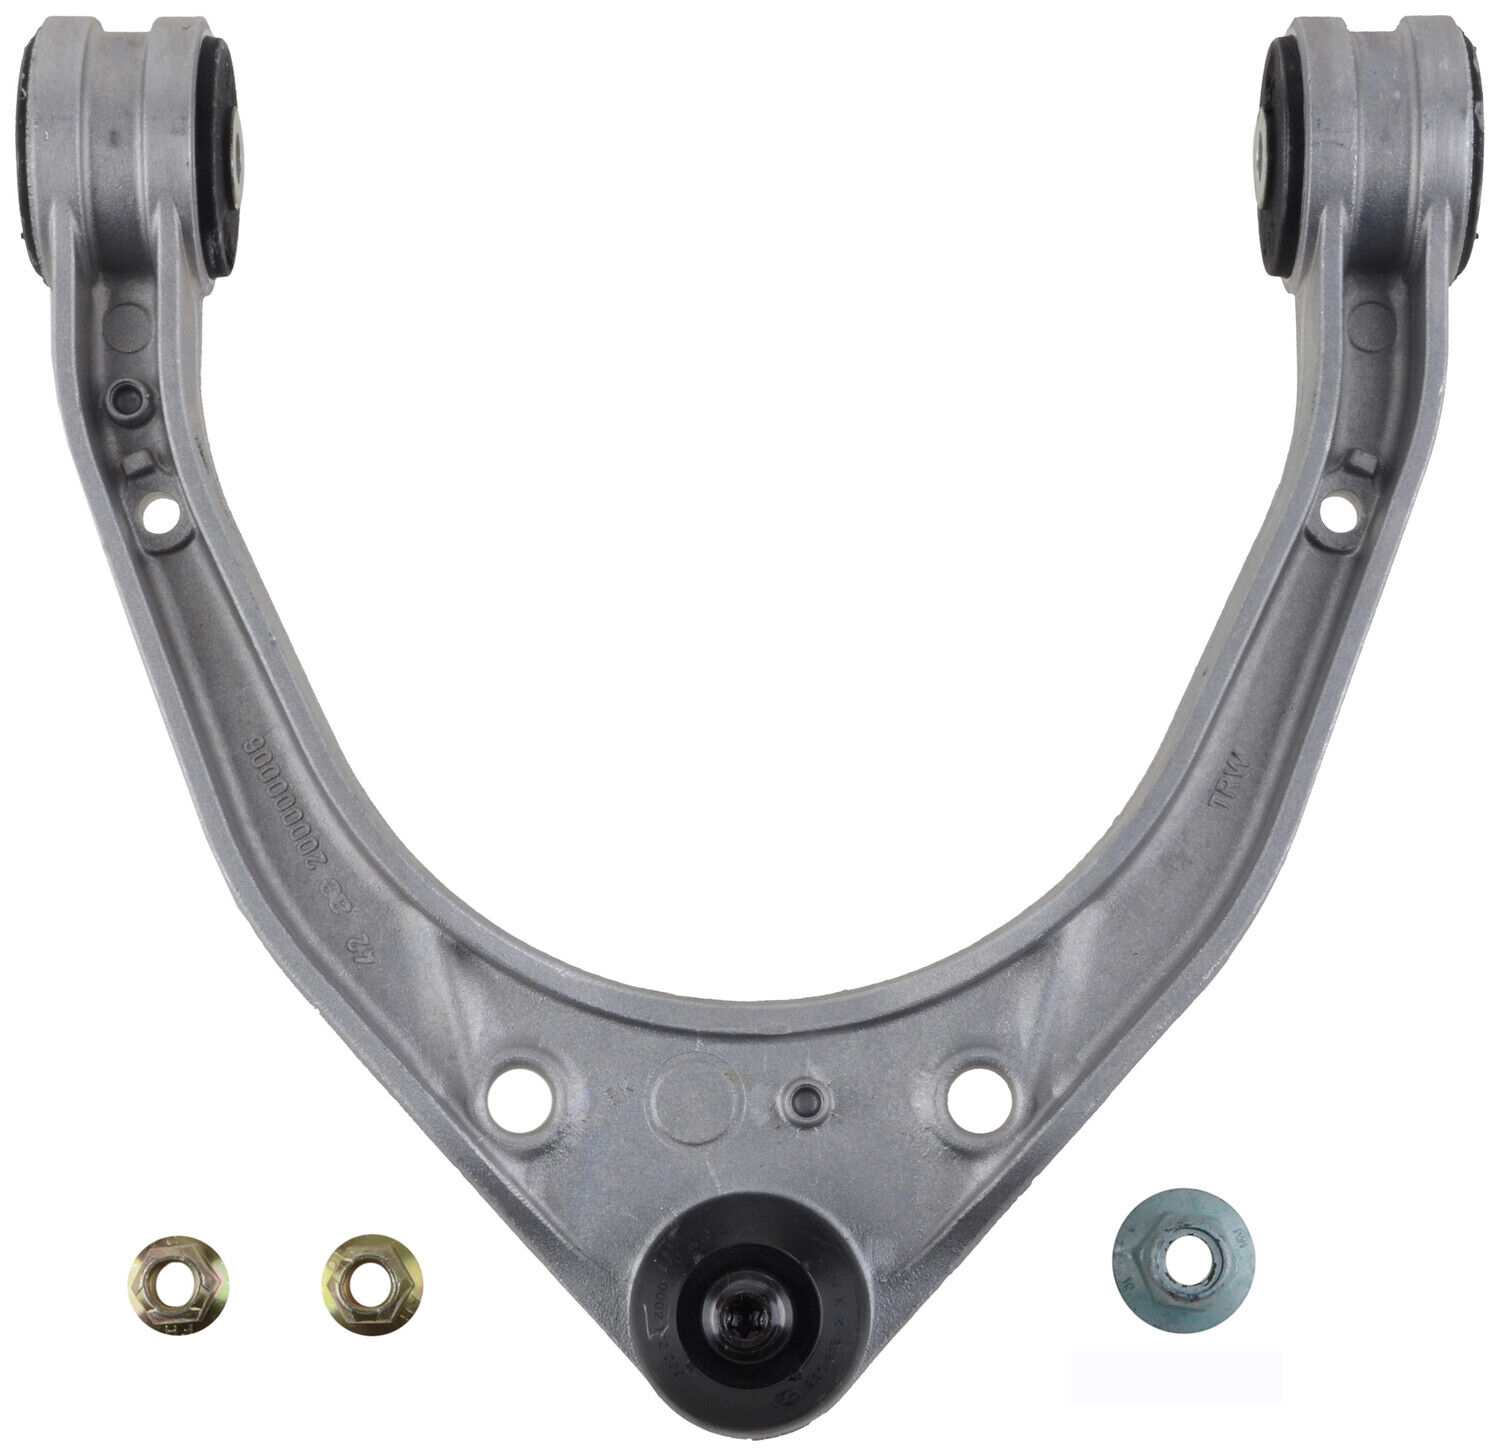 TRW JTC1059 Control Arm for Porsche Cayenne 2003 - 2006 & Other Vehicles